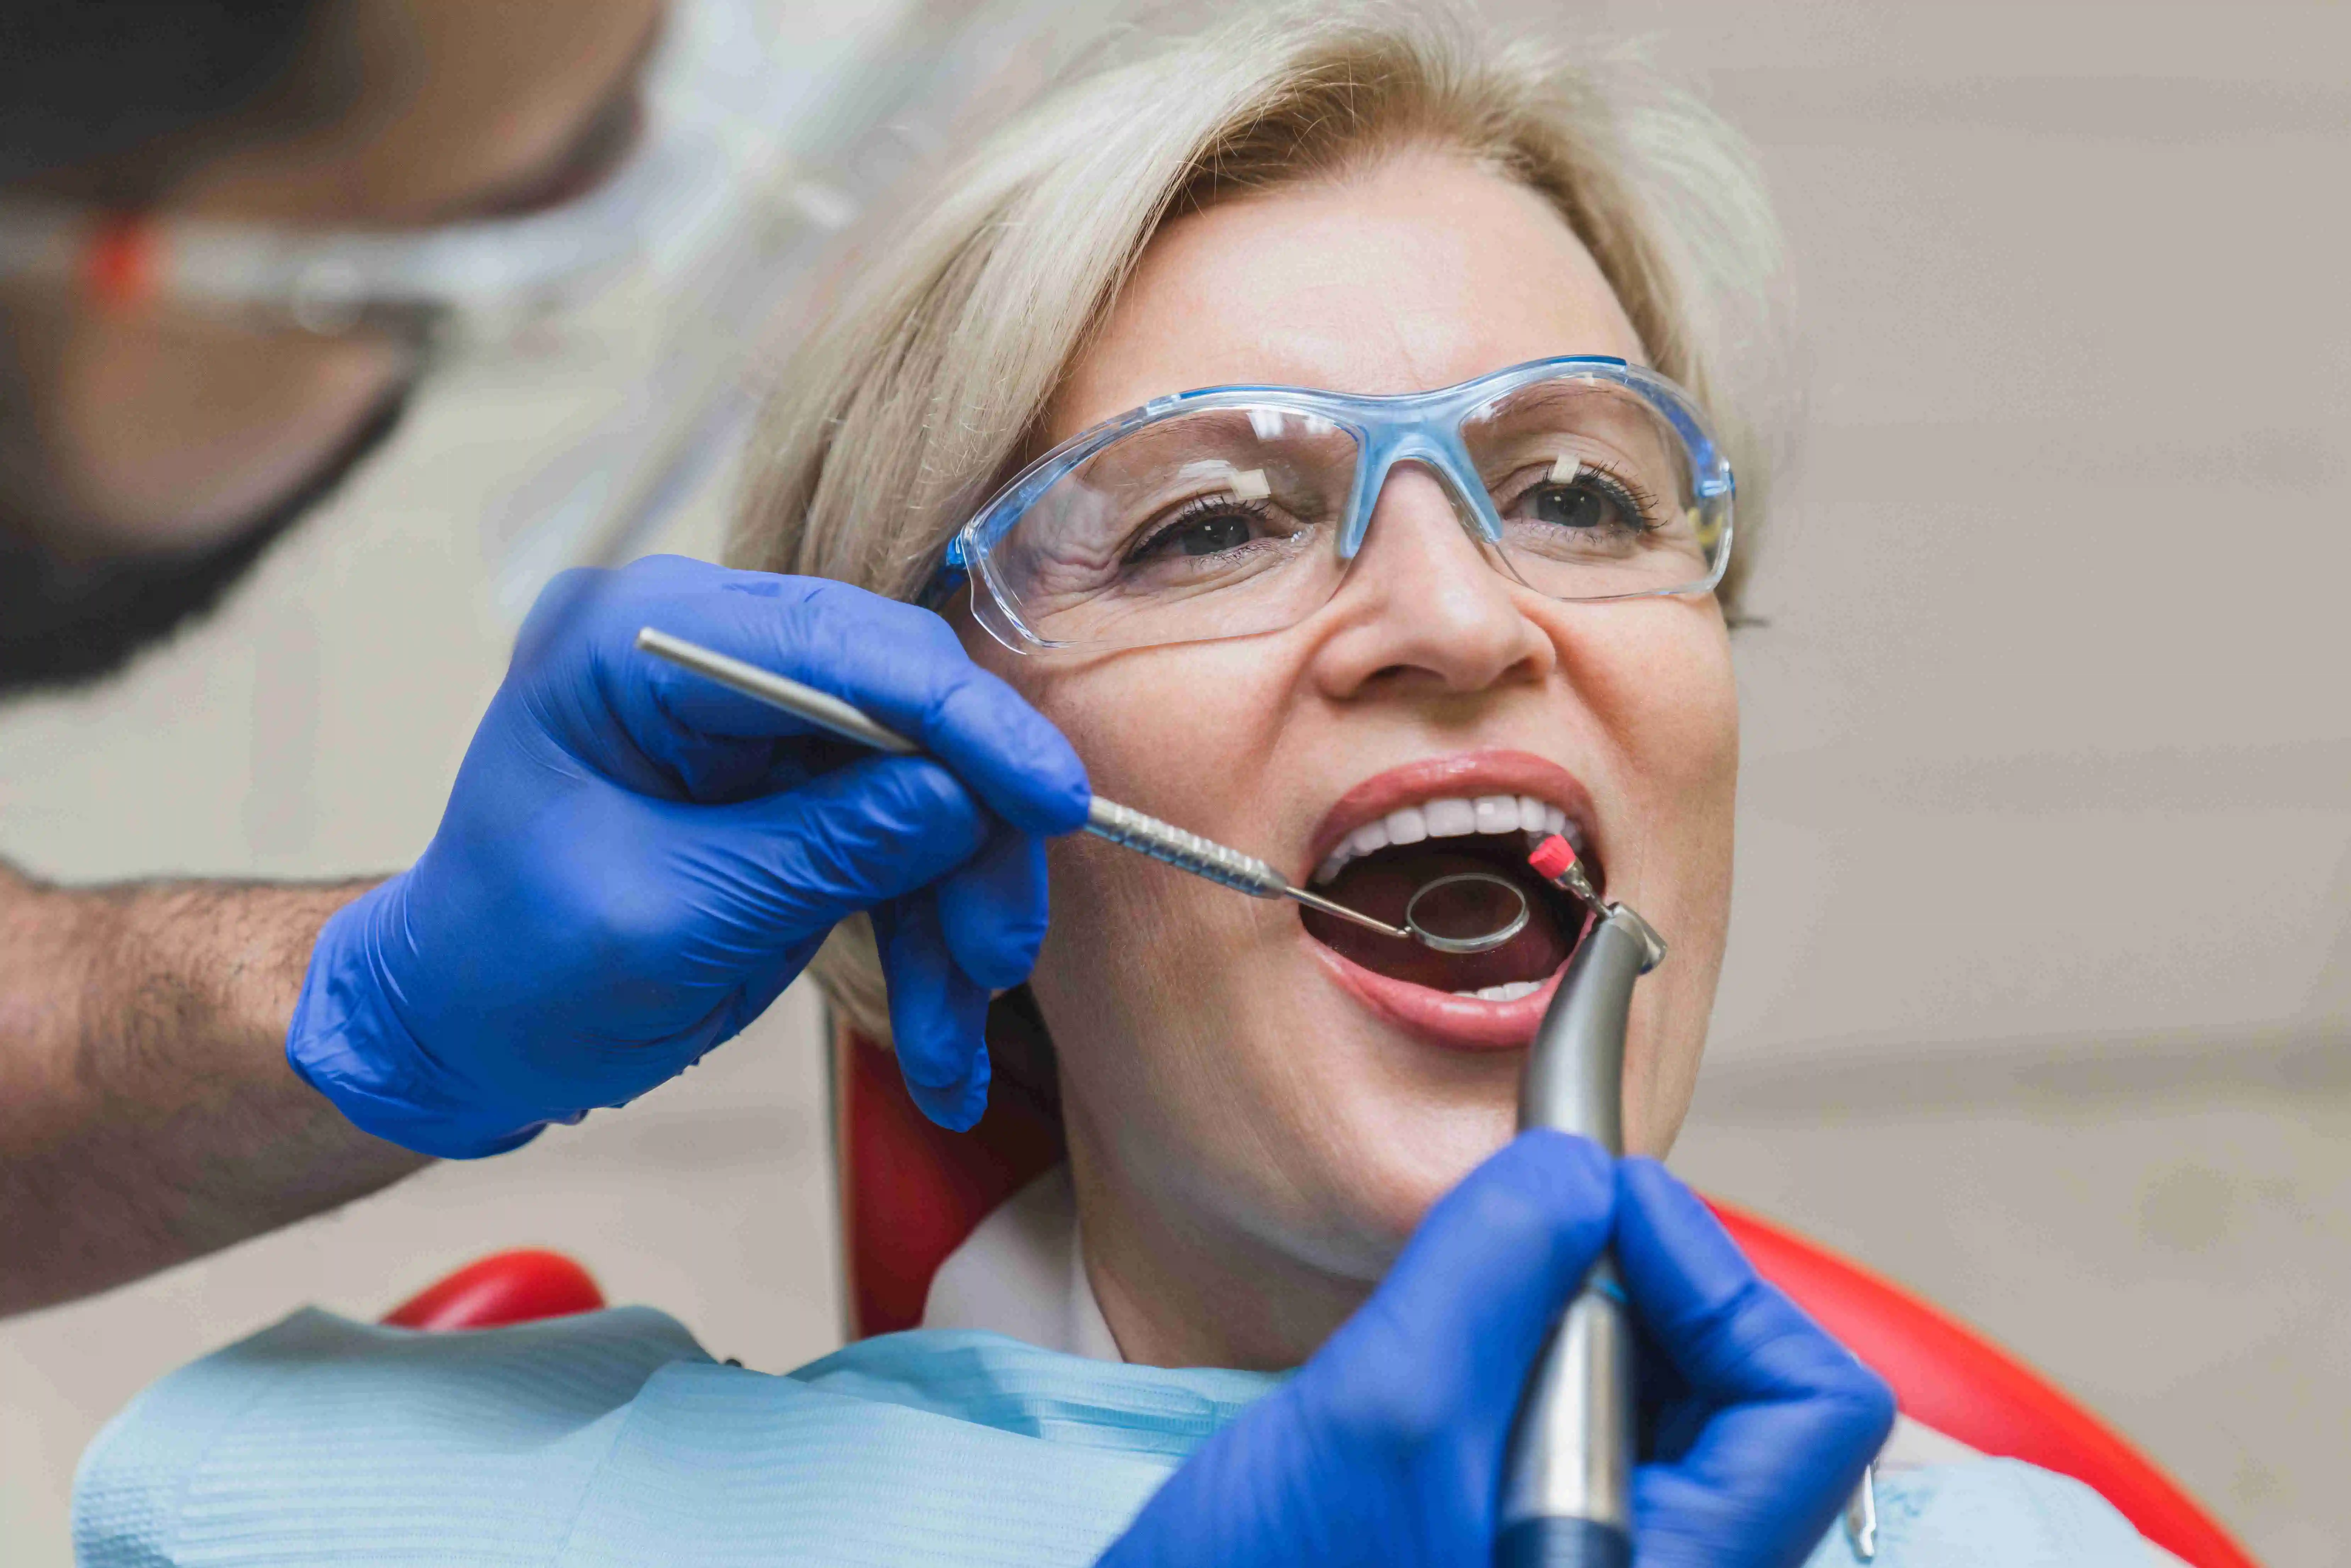 When Should You Consider Getting a Tooth Filling?